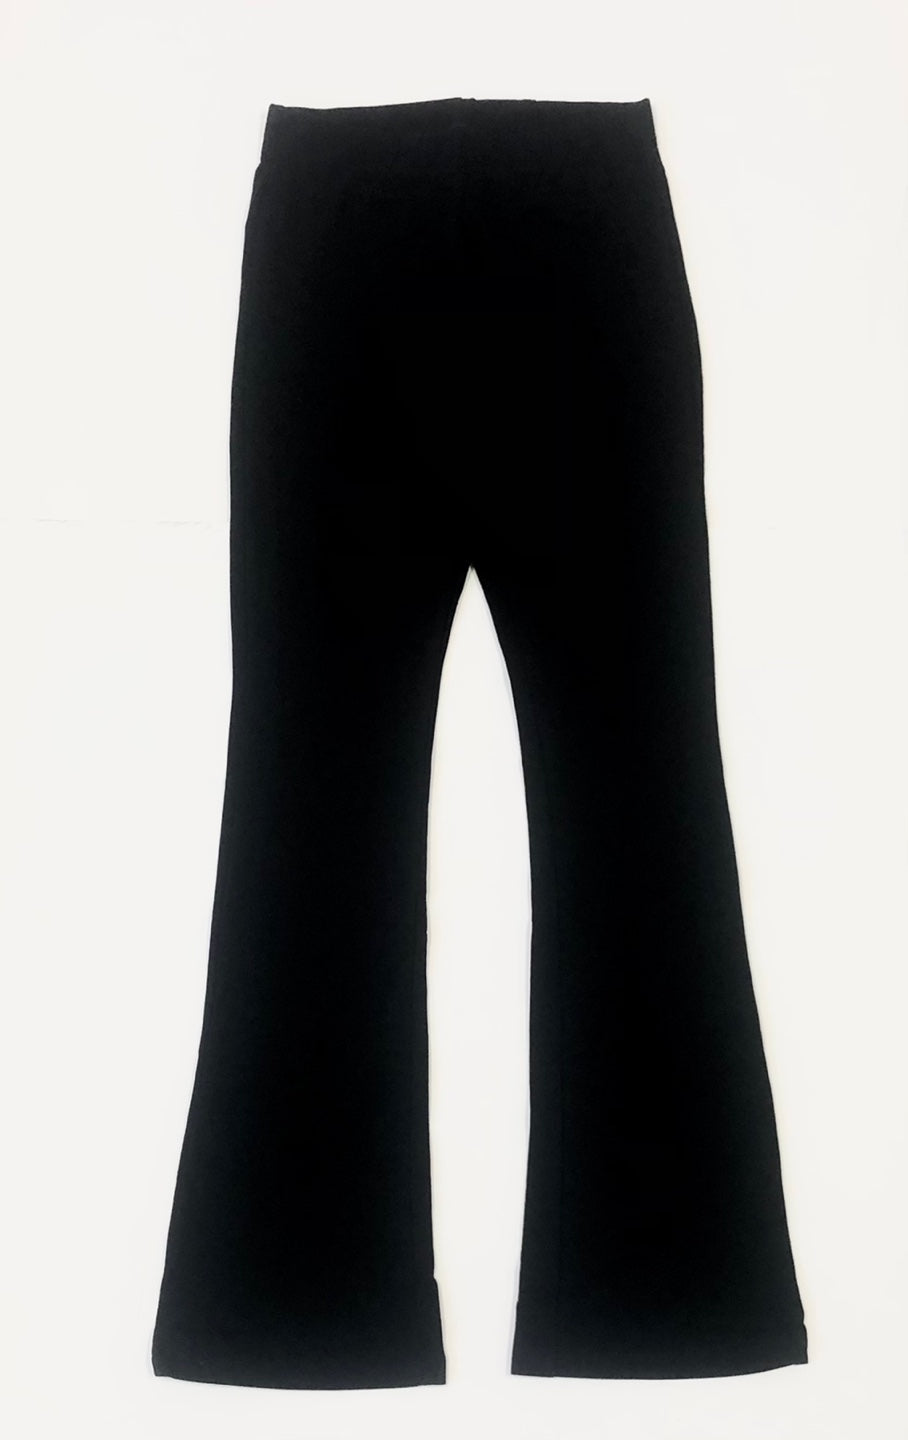 Black Flare Pull On Pants  Black flare, Pull on pants, Flares